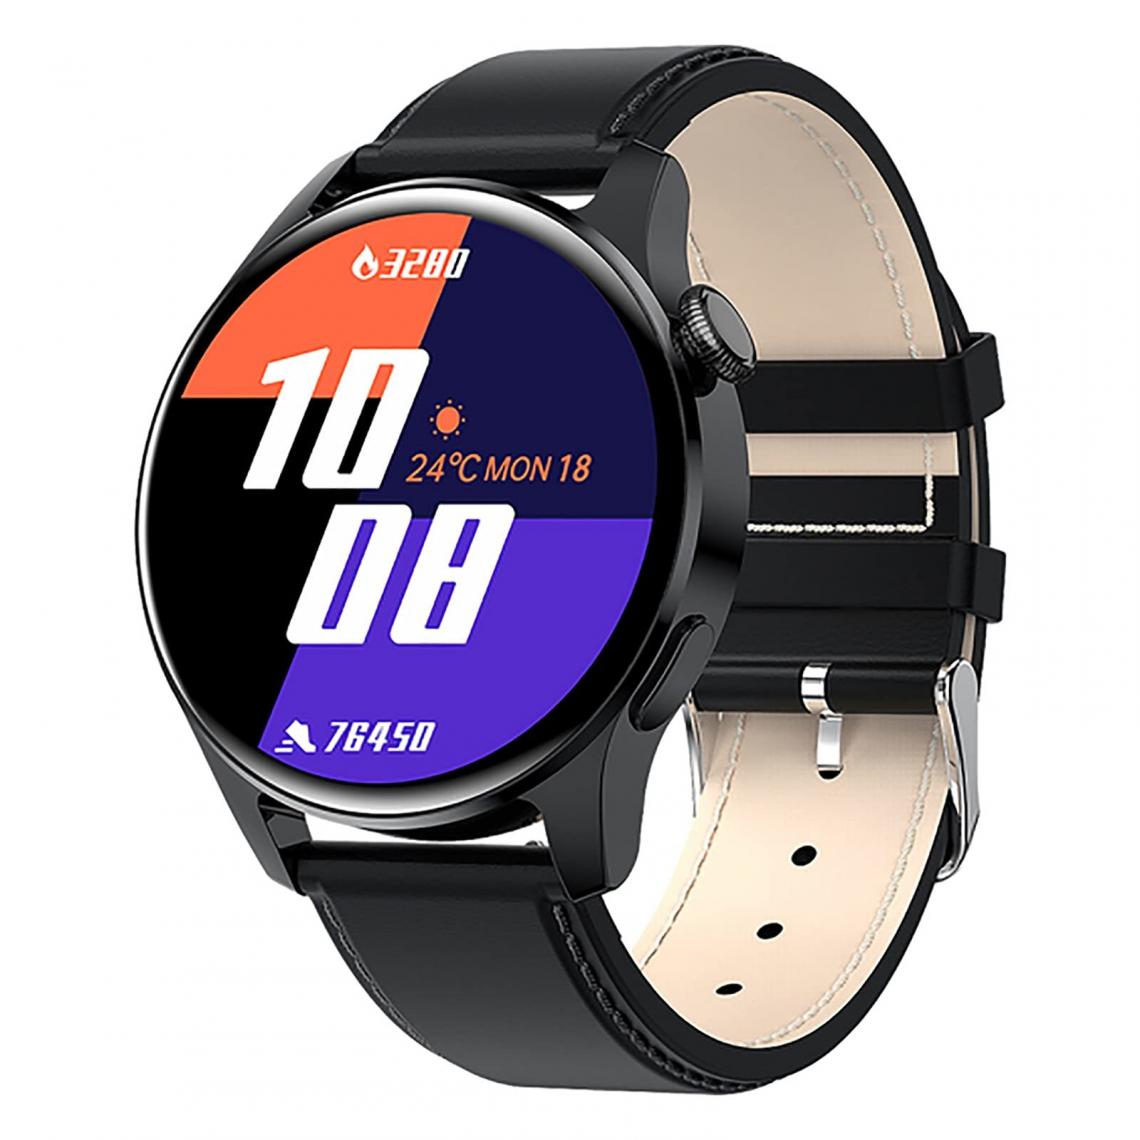 Chronotech Montres - Chronus I29 Smart Watch Bluetooth Call Music Player With Blood Pressure And Blood Oxygen Heart Rate Monitor Activity Tracker Waterproof Sports Watch(black) - Montre connectée